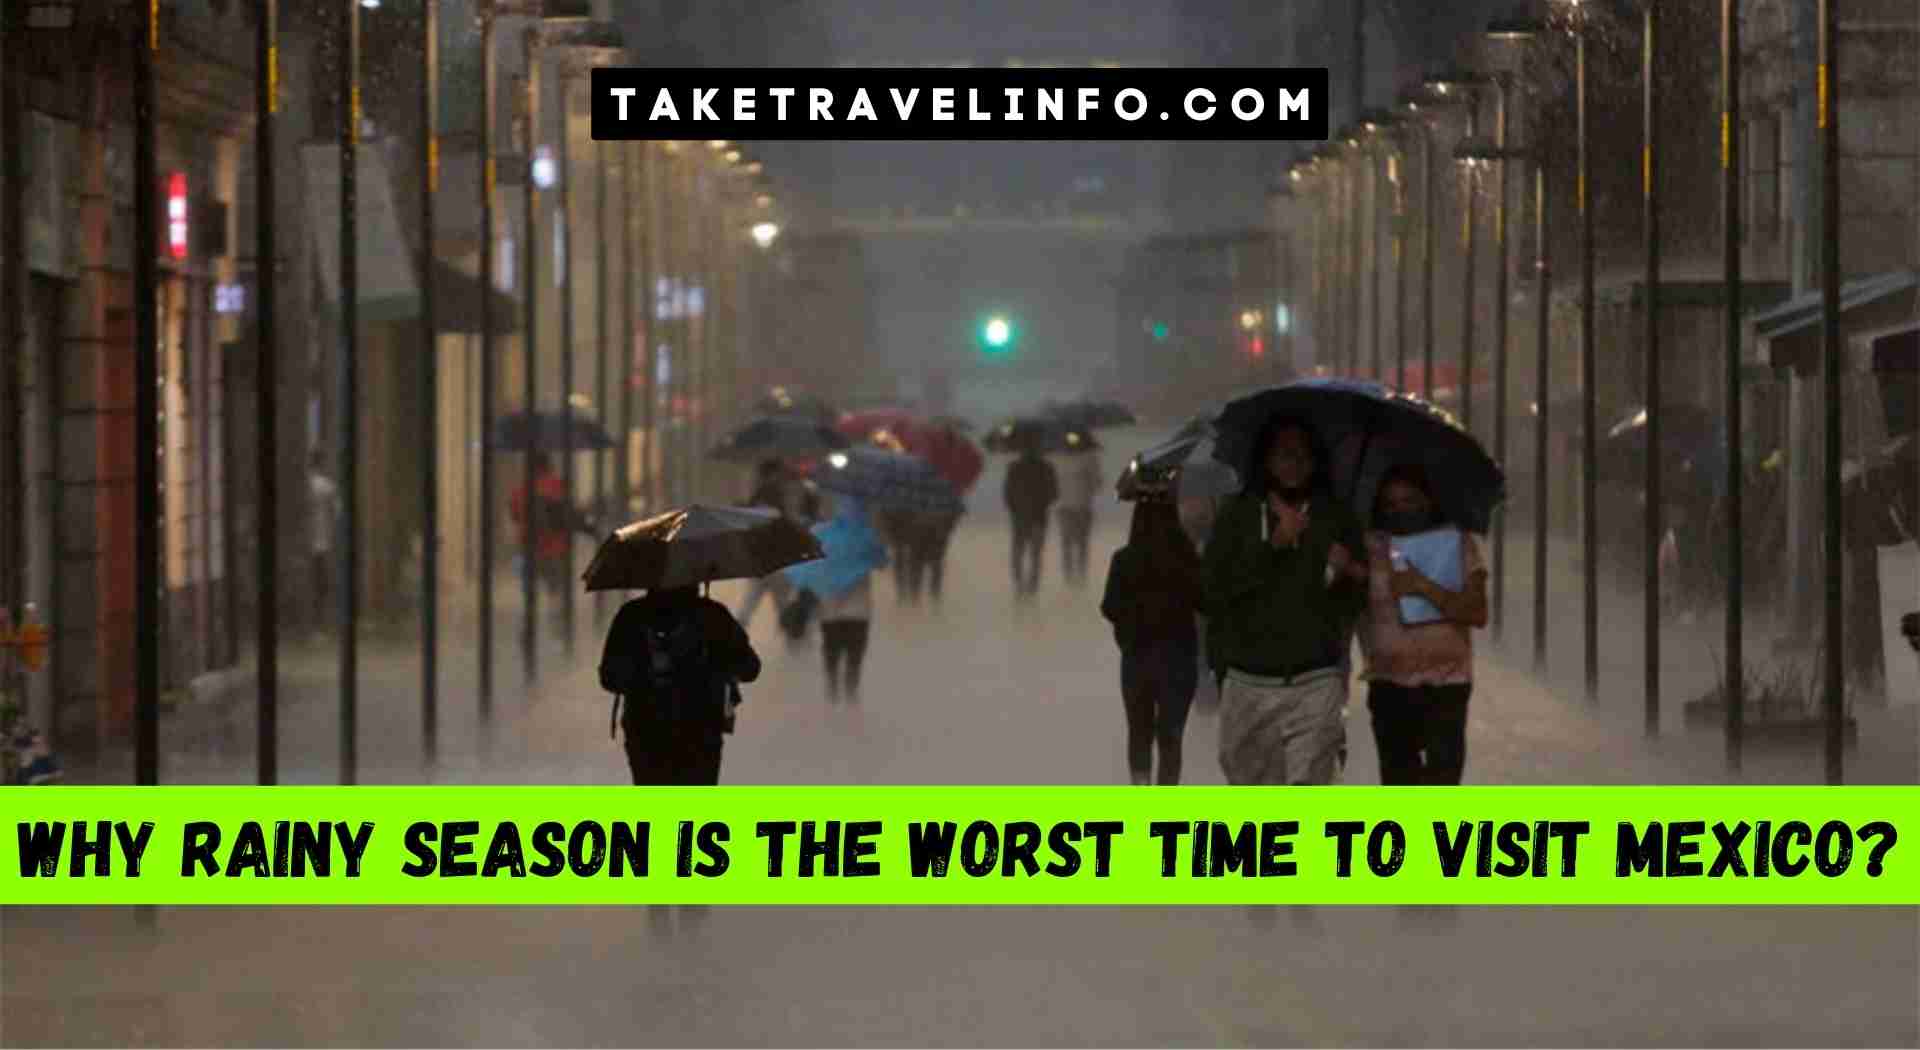 Why Rainy Season is the Worst Time to Visit Mexico?